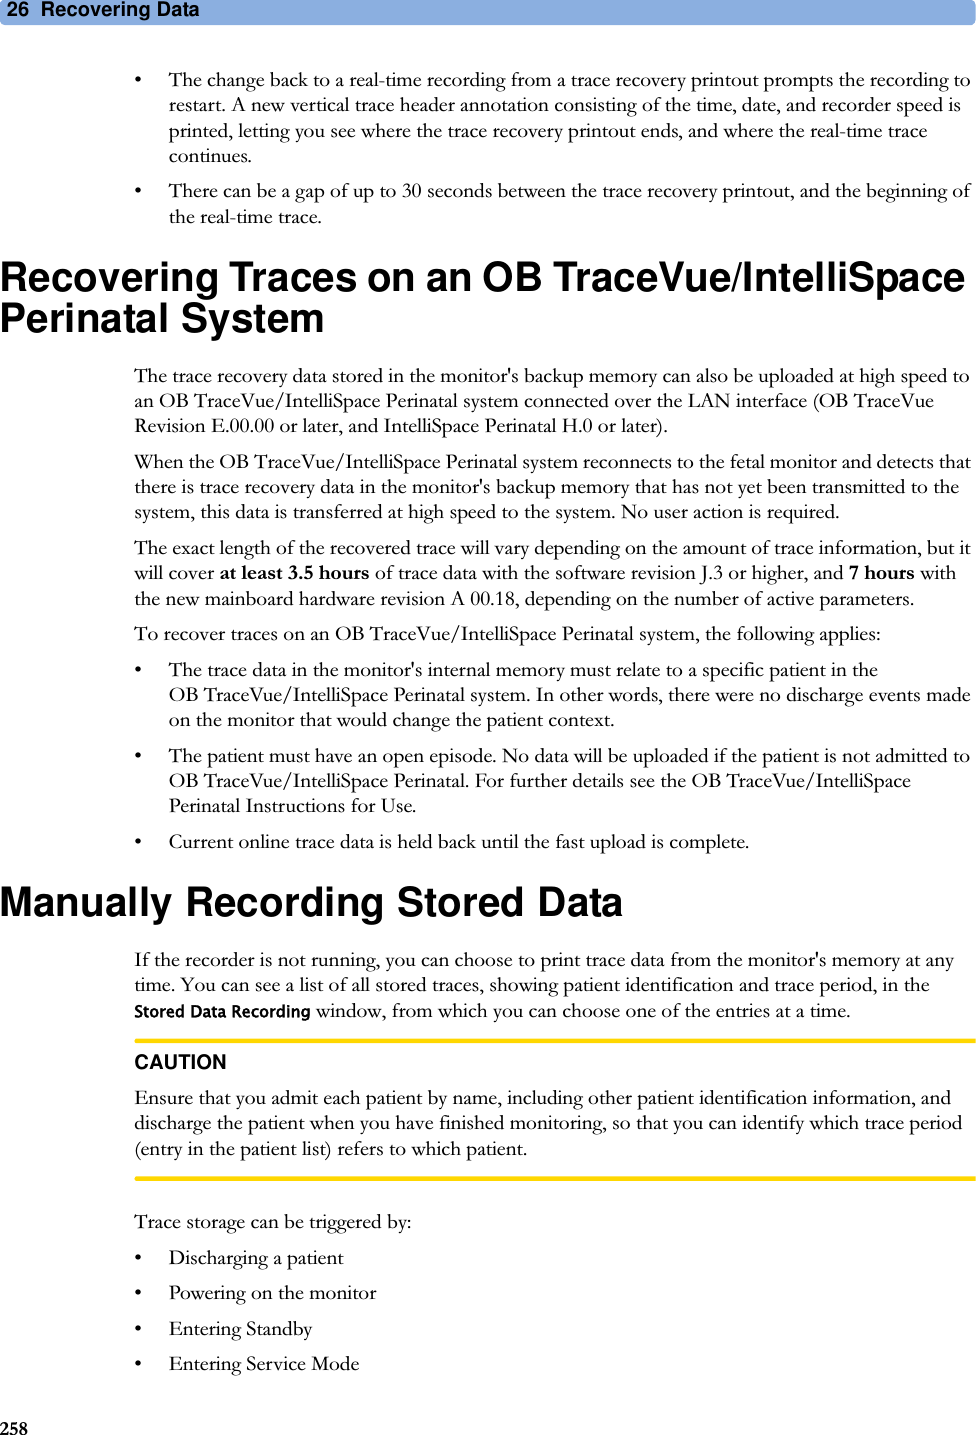 26  Recovering Data258• The change back to a real-time recording from a trace recovery printout prompts the recording to restart. A new vertical trace header annotation consisting of the time, date, and recorder speed is printed, letting you see where the trace recovery printout ends, and where the real-time trace continues.• There can be a gap of up to 30 seconds between the trace recovery printout, and the beginning of the real-time trace.Recovering Traces on an OB TraceVue/IntelliSpace Perinatal SystemThe trace recovery data stored in the monitor&apos;s backup memory can also be uploaded at high speed to an OB TraceVue/IntelliSpace Perinatal system connected over the LAN interface (OB TraceVue Revision E.00.00 or later, and IntelliSpace Perinatal H.0 or later).When the OB TraceVue/IntelliSpace Perinatal system reconnects to the fetal monitor and detects that there is trace recovery data in the monitor&apos;s backup memory that has not yet been transmitted to the system, this data is transferred at high speed to the system. No user action is required.The exact length of the recovered trace will vary depending on the amount of trace information, but it will cover at least 3.5 hours of trace data with the software revision J.3 or higher, and 7 hours with the new mainboard hardware revision A 00.18, depending on the number of active parameters.To recover traces on an OB TraceVue/IntelliSpace Perinatal system, the following applies:• The trace data in the monitor&apos;s internal memory must relate to a specific patient in the OB TraceVue/IntelliSpace Perinatal system. In other words, there were no discharge events made on the monitor that would change the patient context.• The patient must have an open episode. No data will be uploaded if the patient is not admitted to OB TraceVue/IntelliSpace Perinatal. For further details see the OB TraceVue/IntelliSpace Perinatal Instructions for Use.• Current online trace data is held back until the fast upload is complete.Manually Recording Stored DataIf the recorder is not running, you can choose to print trace data from the monitor&apos;s memory at any time. You can see a list of all stored traces, showing patient identification and trace period, in the Stored Data Recording window, from which you can choose one of the entries at a time.CAUTIONEnsure that you admit each patient by name, including other patient identification information, and discharge the patient when you have finished monitoring, so that you can identify which trace period (entry in the patient list) refers to which patient.Trace storage can be triggered by:• Discharging a patient• Powering on the monitor• Entering Standby• Entering Service Mode